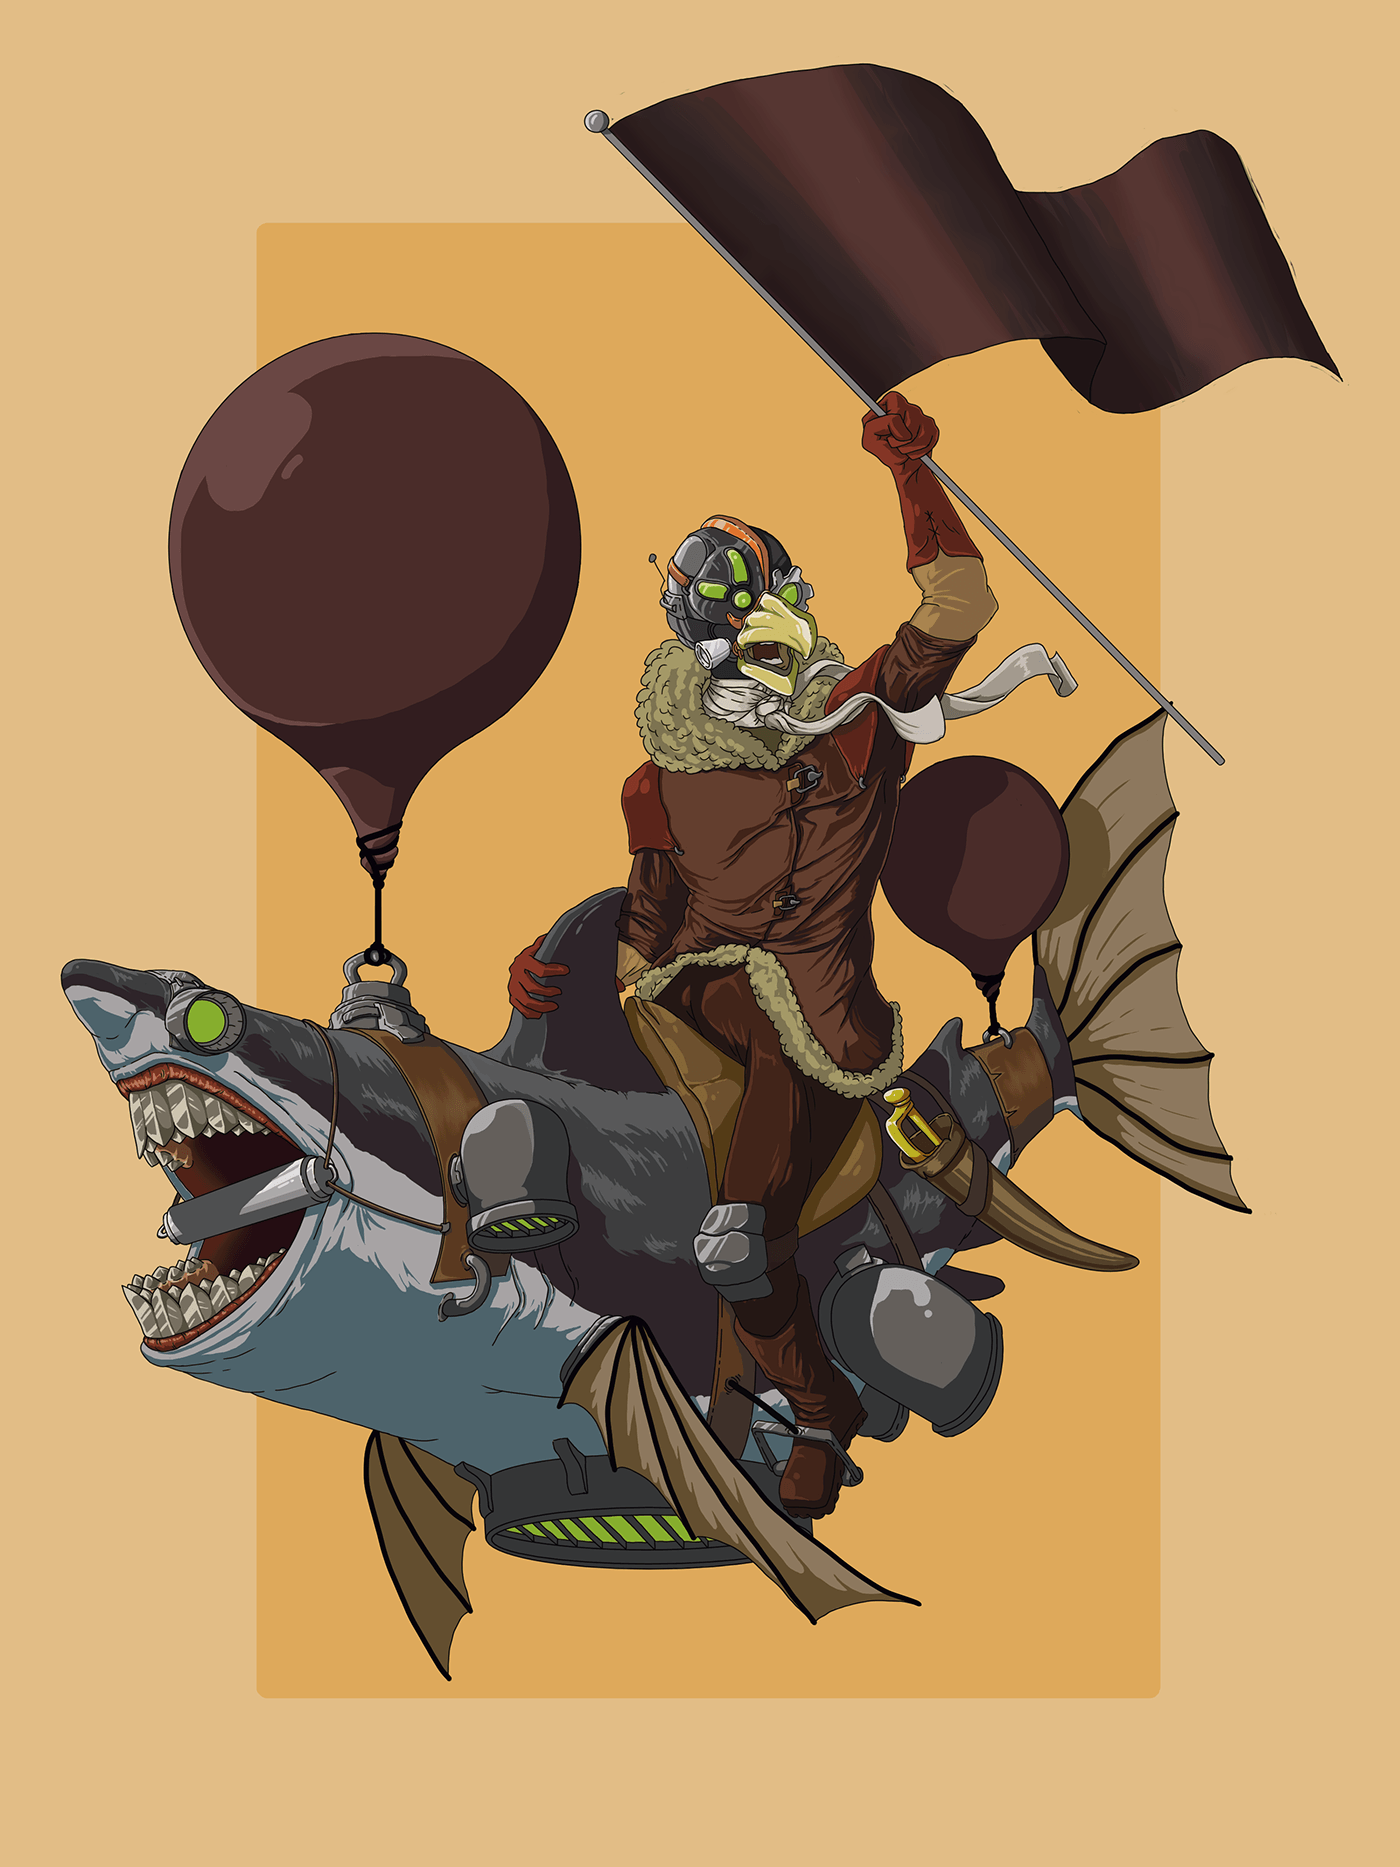 Just a drawing of shark raider. Maybe he's a revolutionist or something...